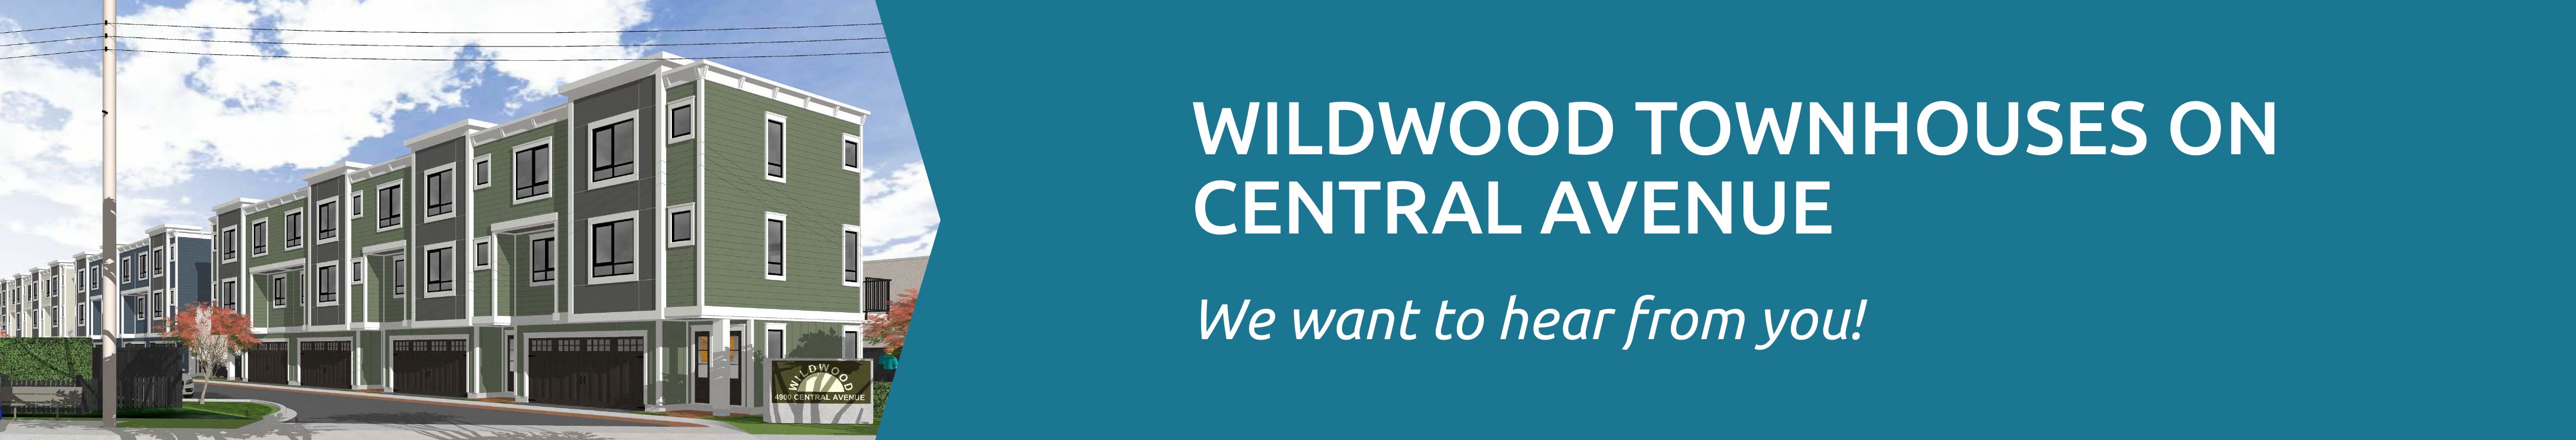 Wildwood Townhouses on Central Avenue - We want to hear from you!